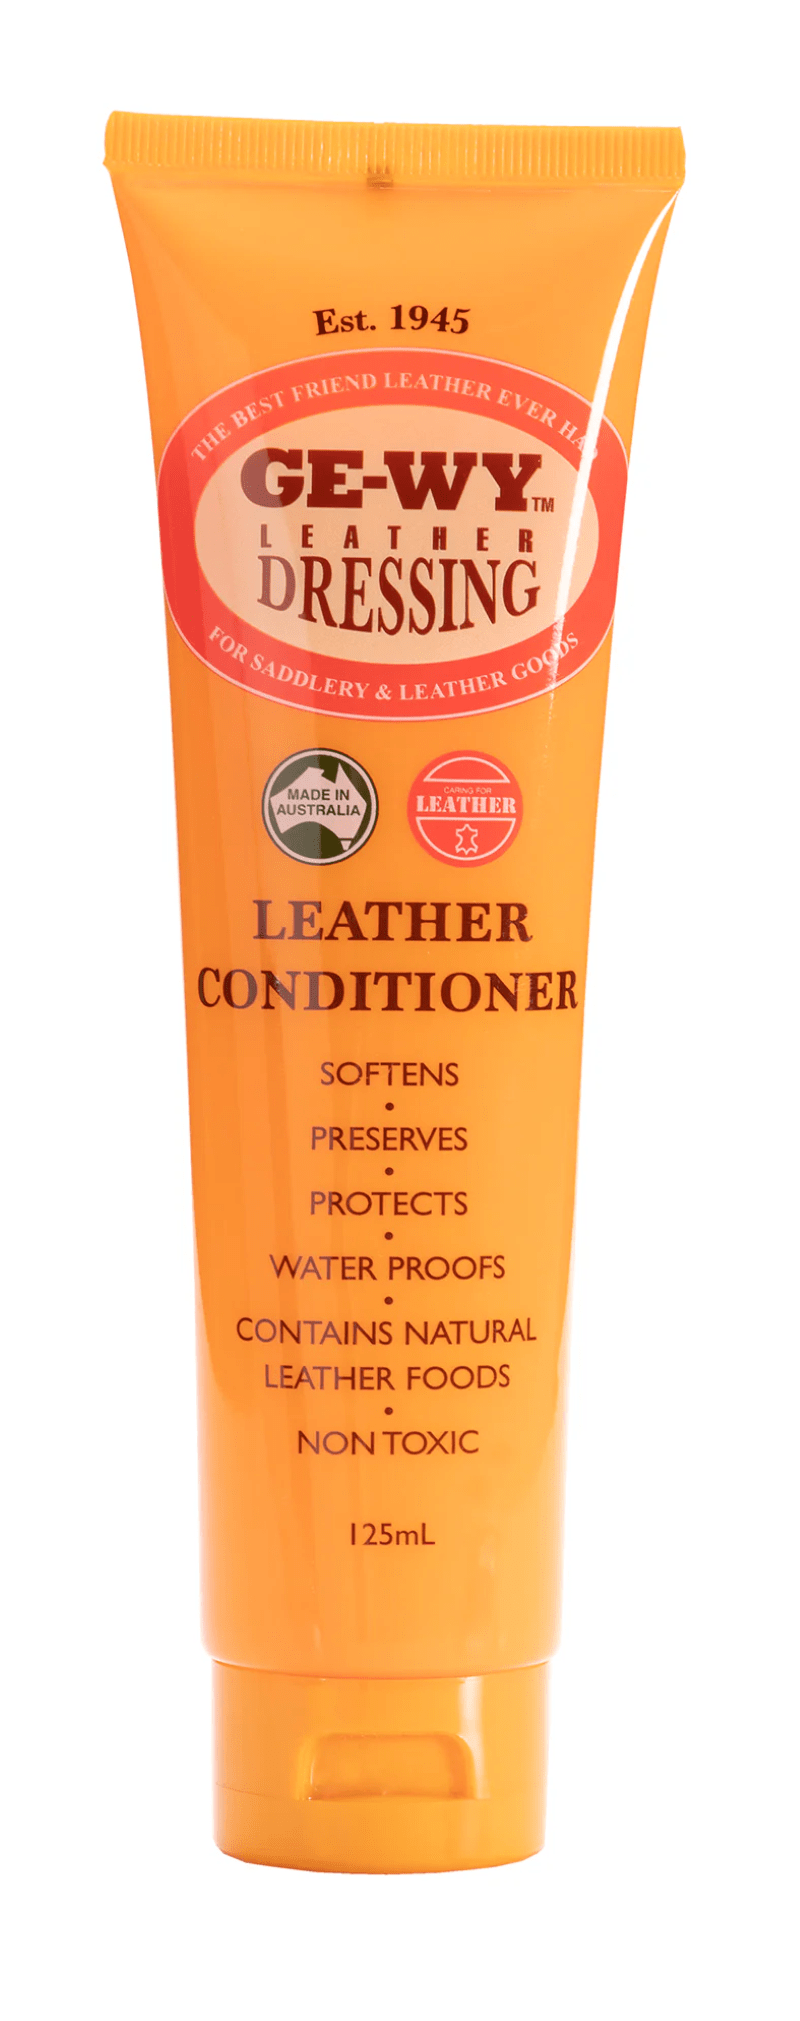 GEWY Vet & Feed 125ml GE-WY Leather Conditioner